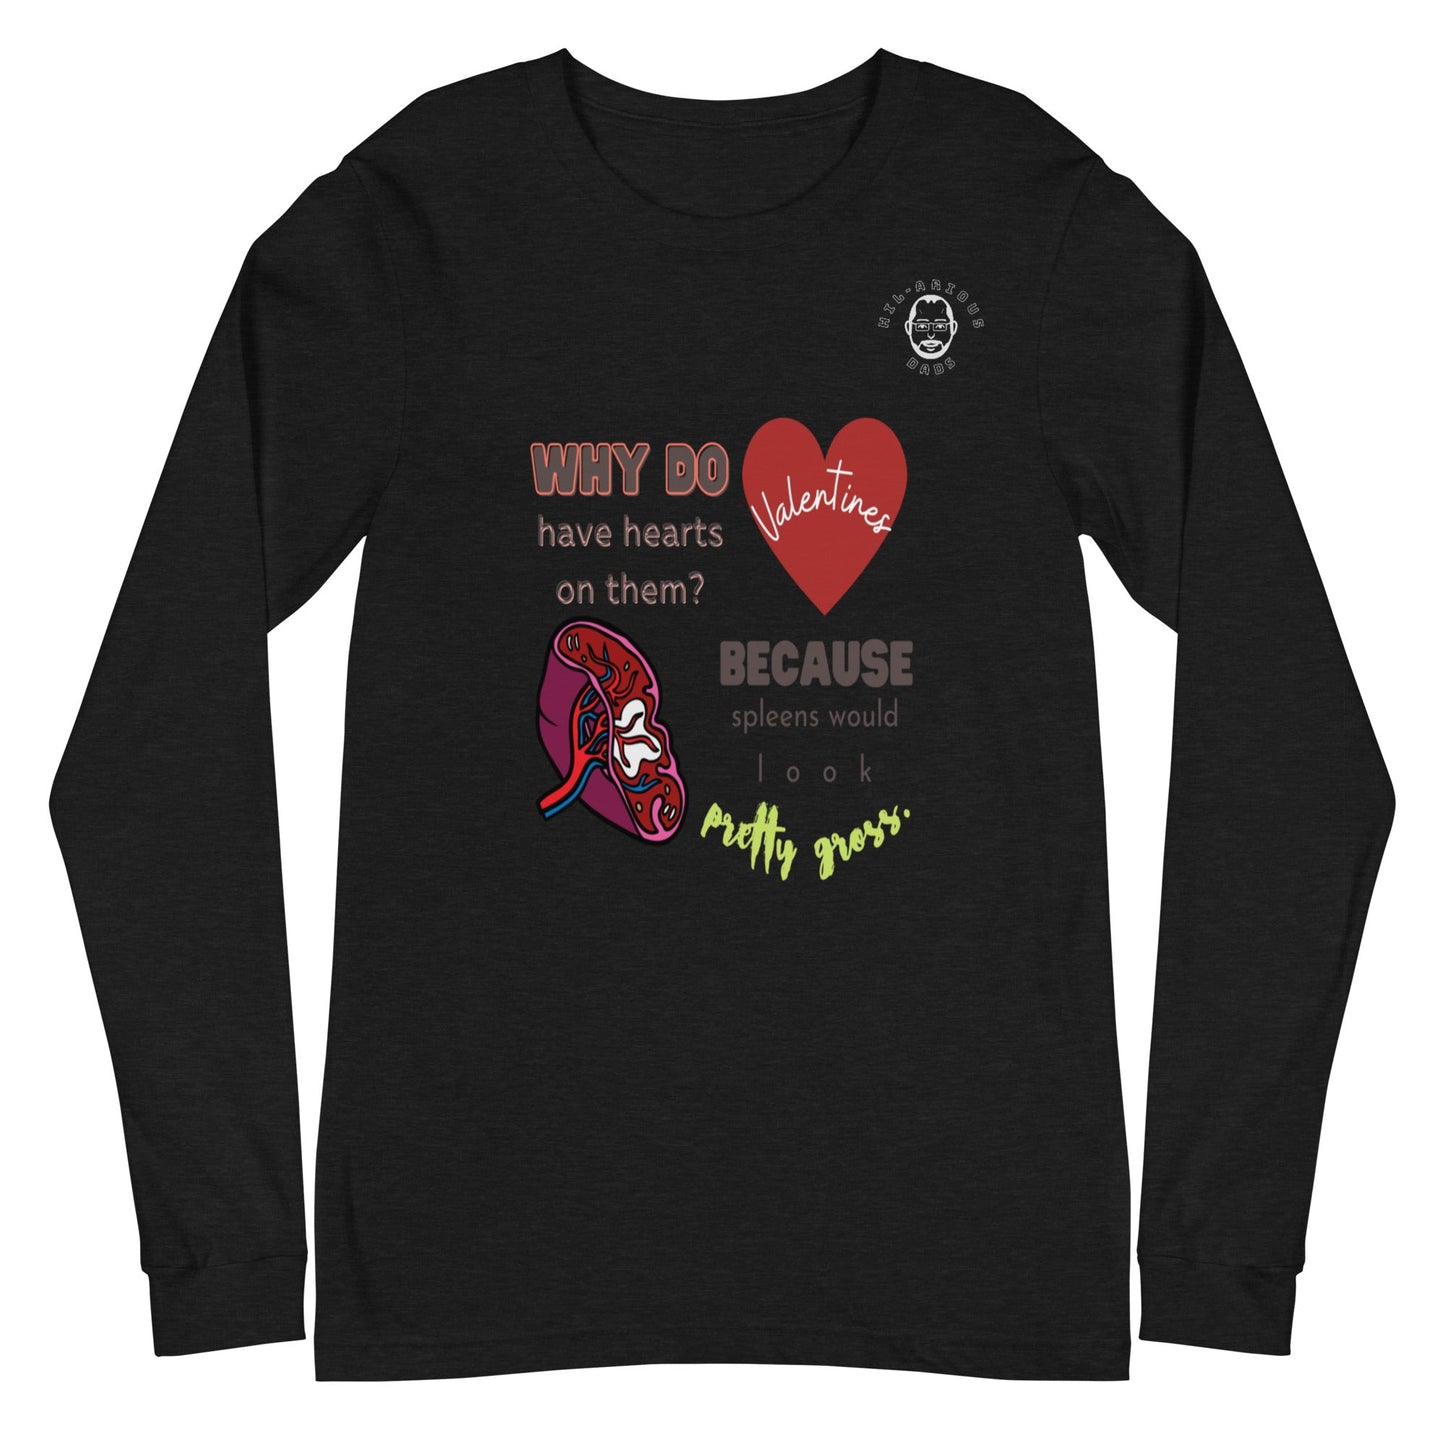 Why do Valentine's have hearts on them? -Long Sleeve Tee - Hil-arious Dads